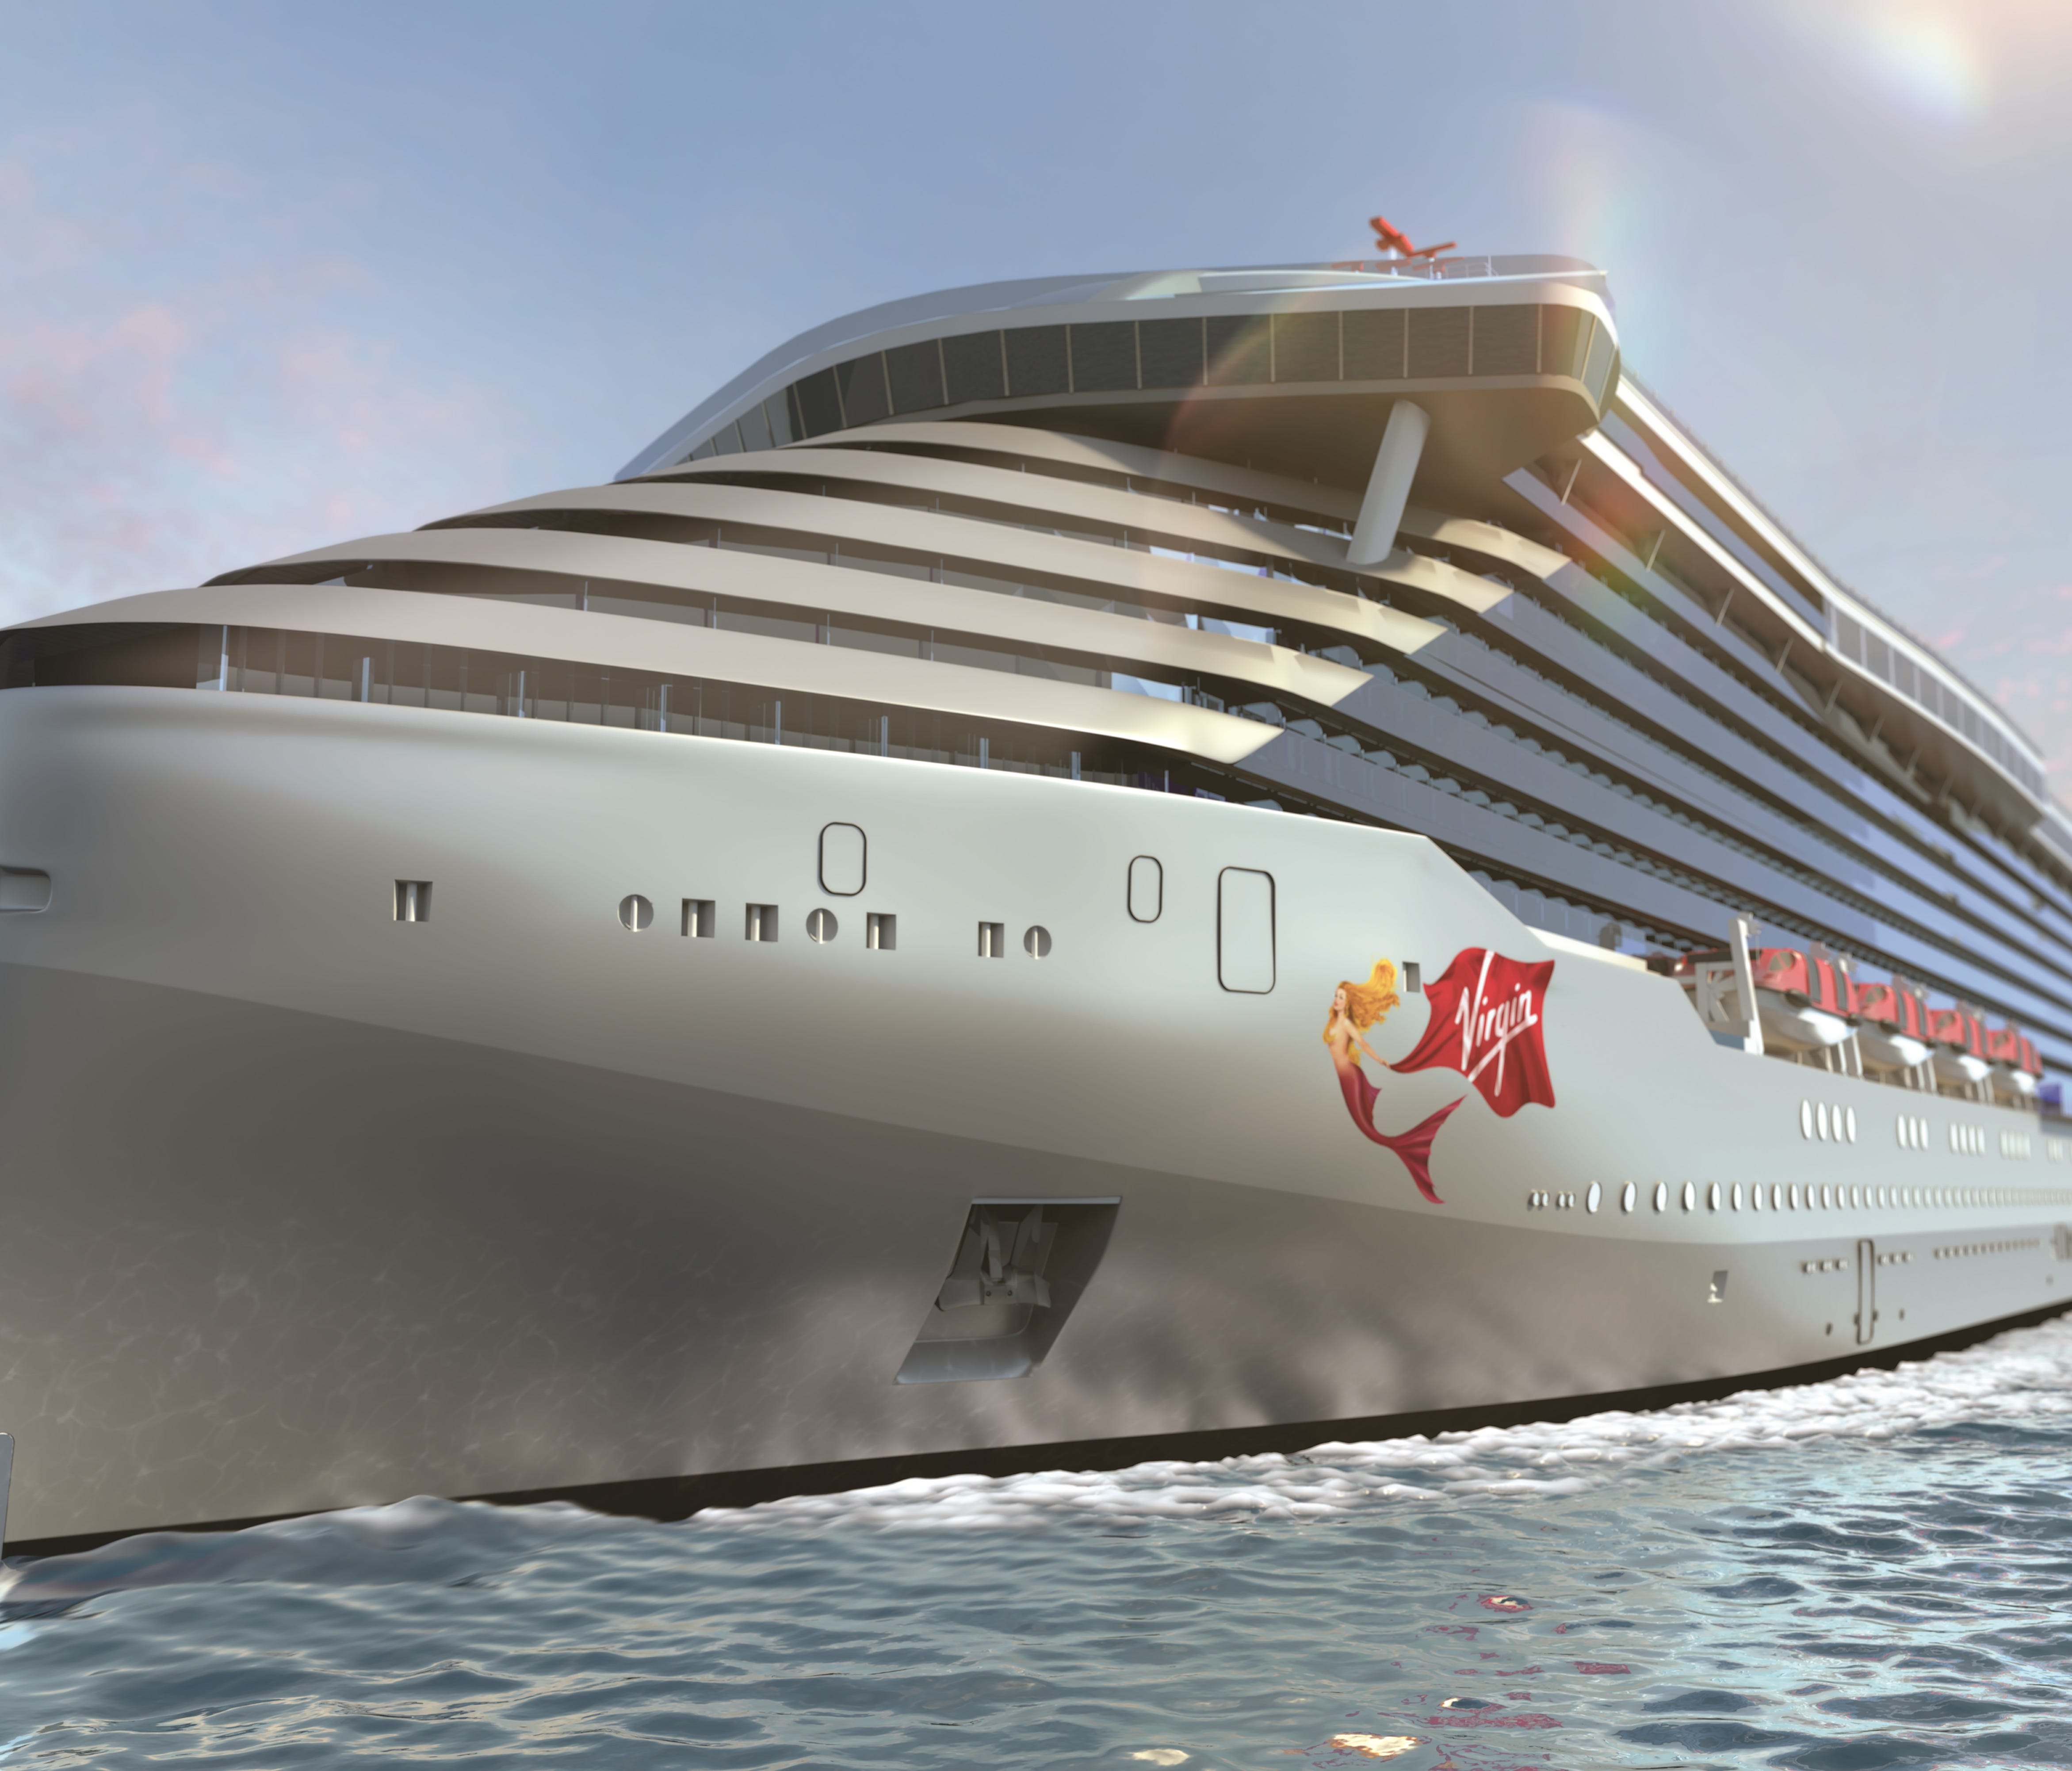 Debuting in 2020, the first ship from start-up line Virgin Voyages will carry 2,860 passengers at double occupancy.